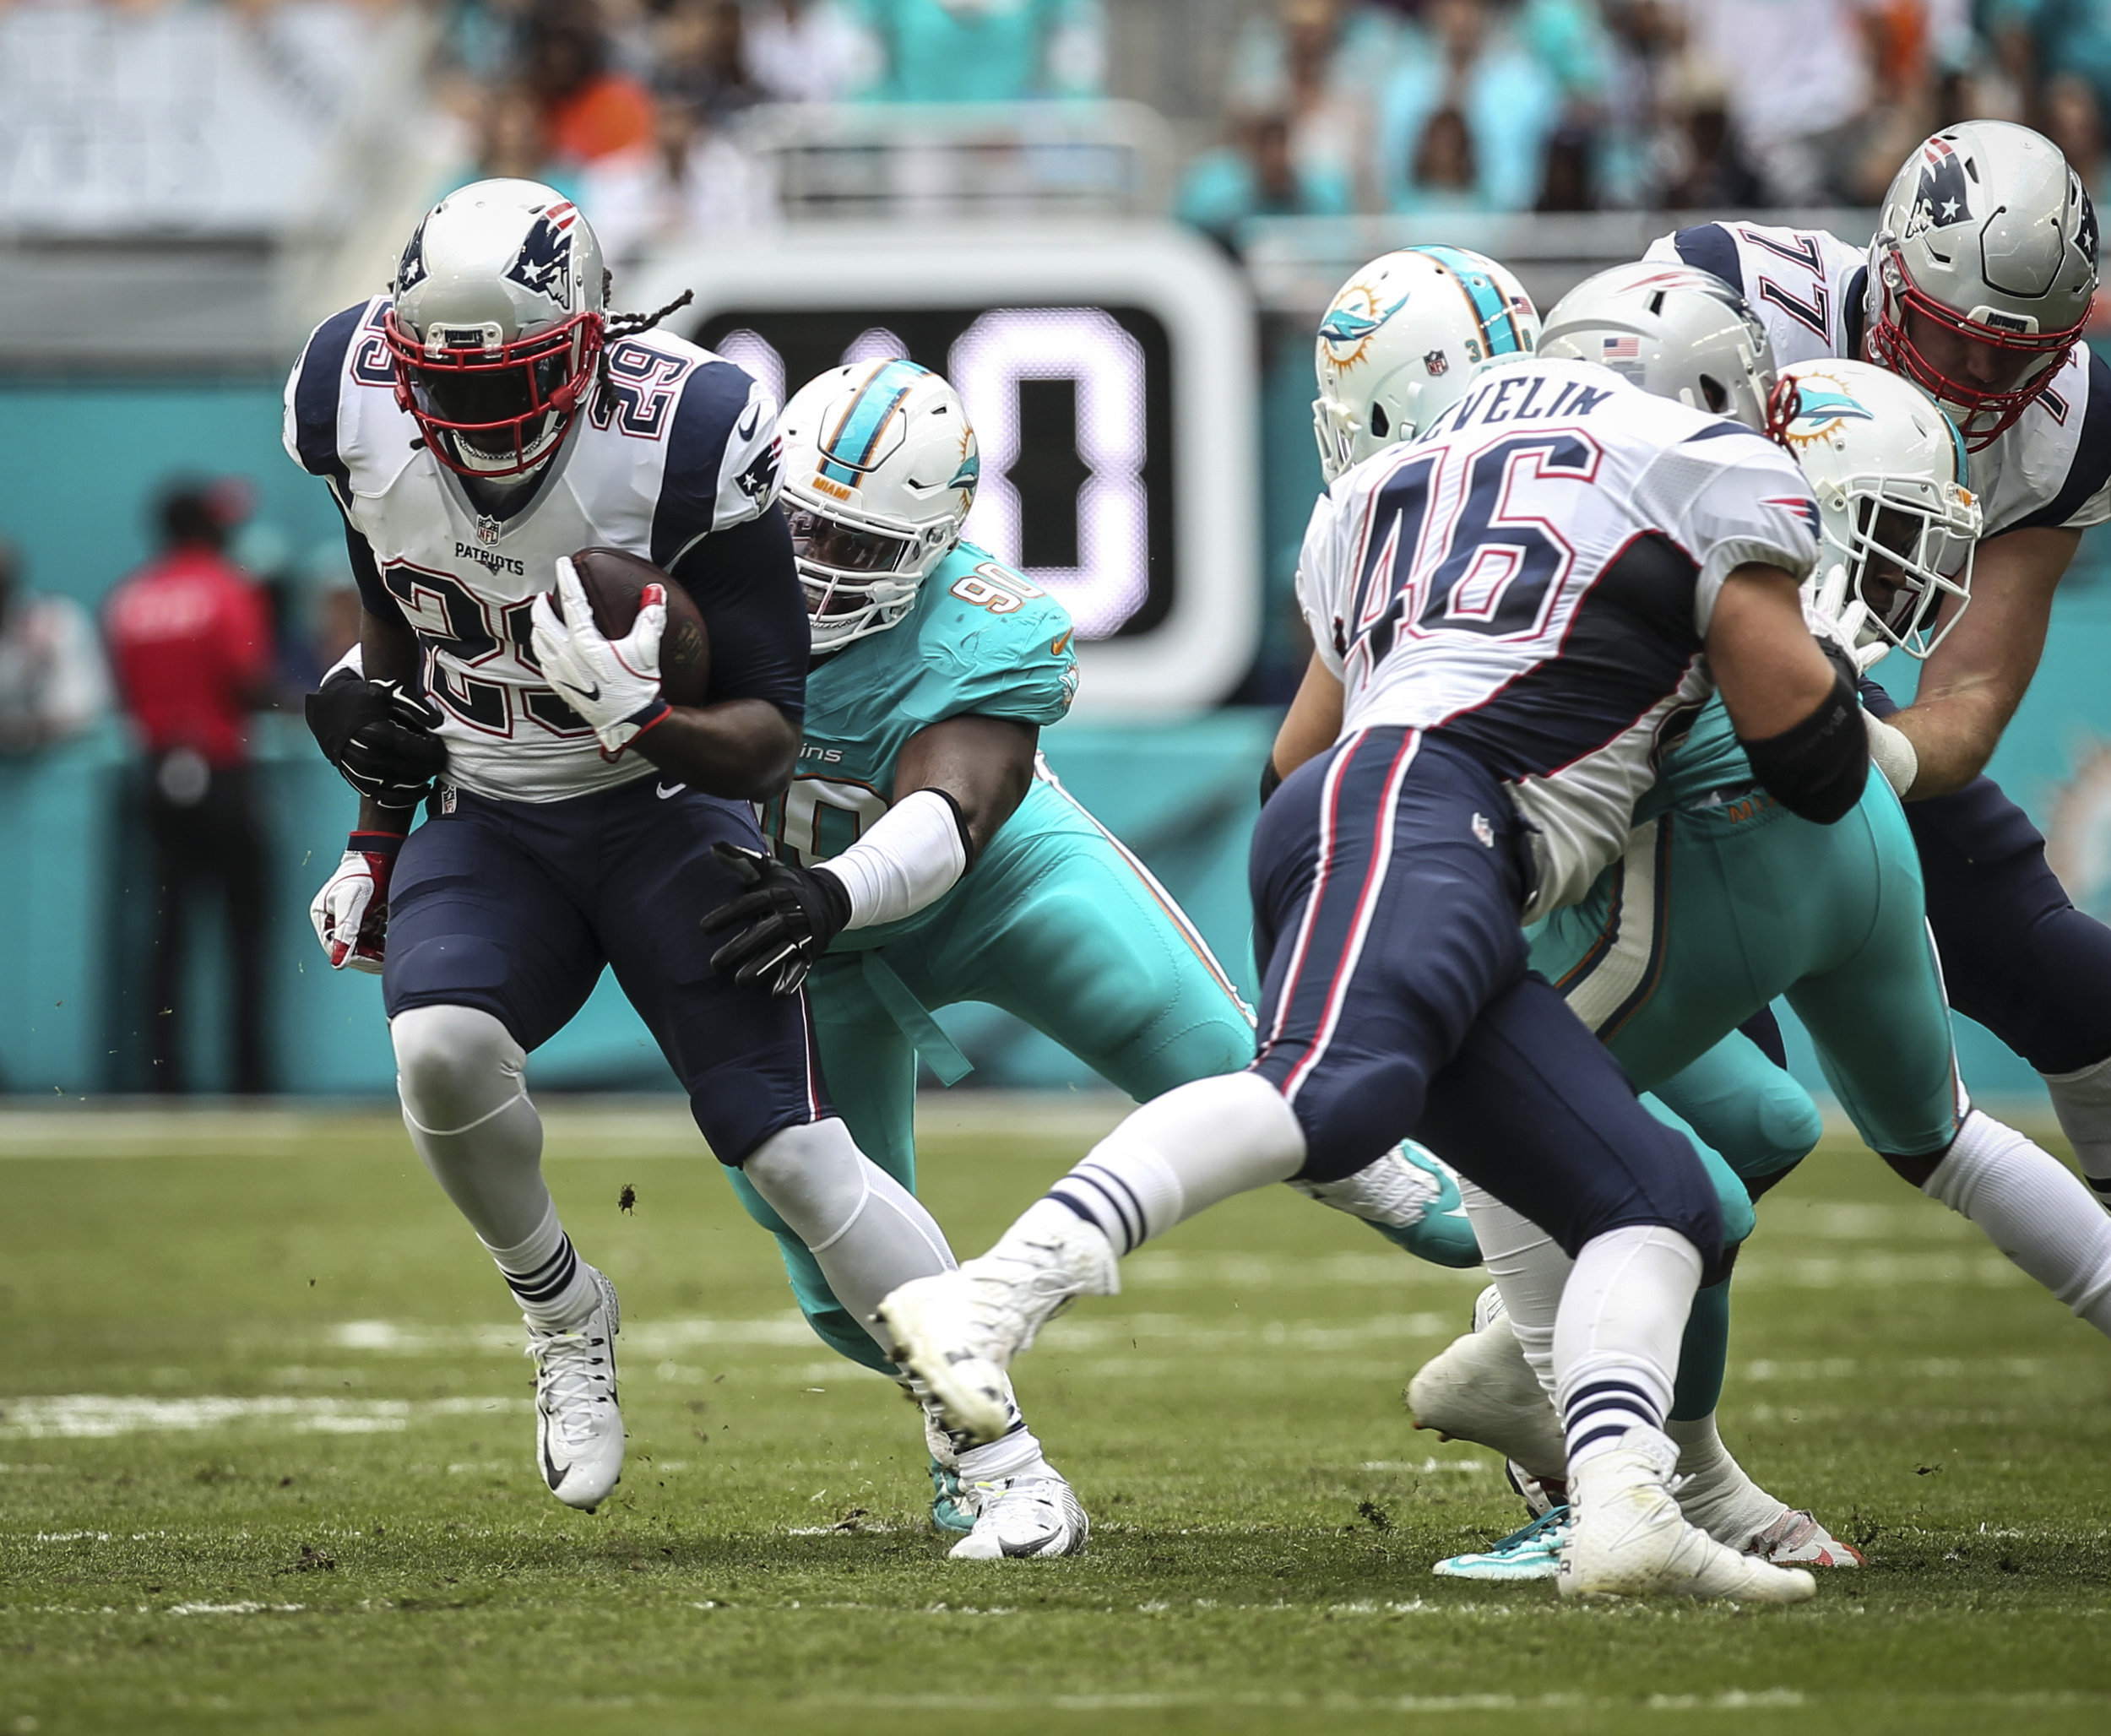  New England Patriots running back LeGarrette Blount (29) breaks loose of a tackle by Miami Dolphins defensive tackle Earl Mitchell (90). Blount rushed for 44 yards on 9 carries against the Dolphins at Hard Rock Stadium in Miami Gardens, Florida, Jan